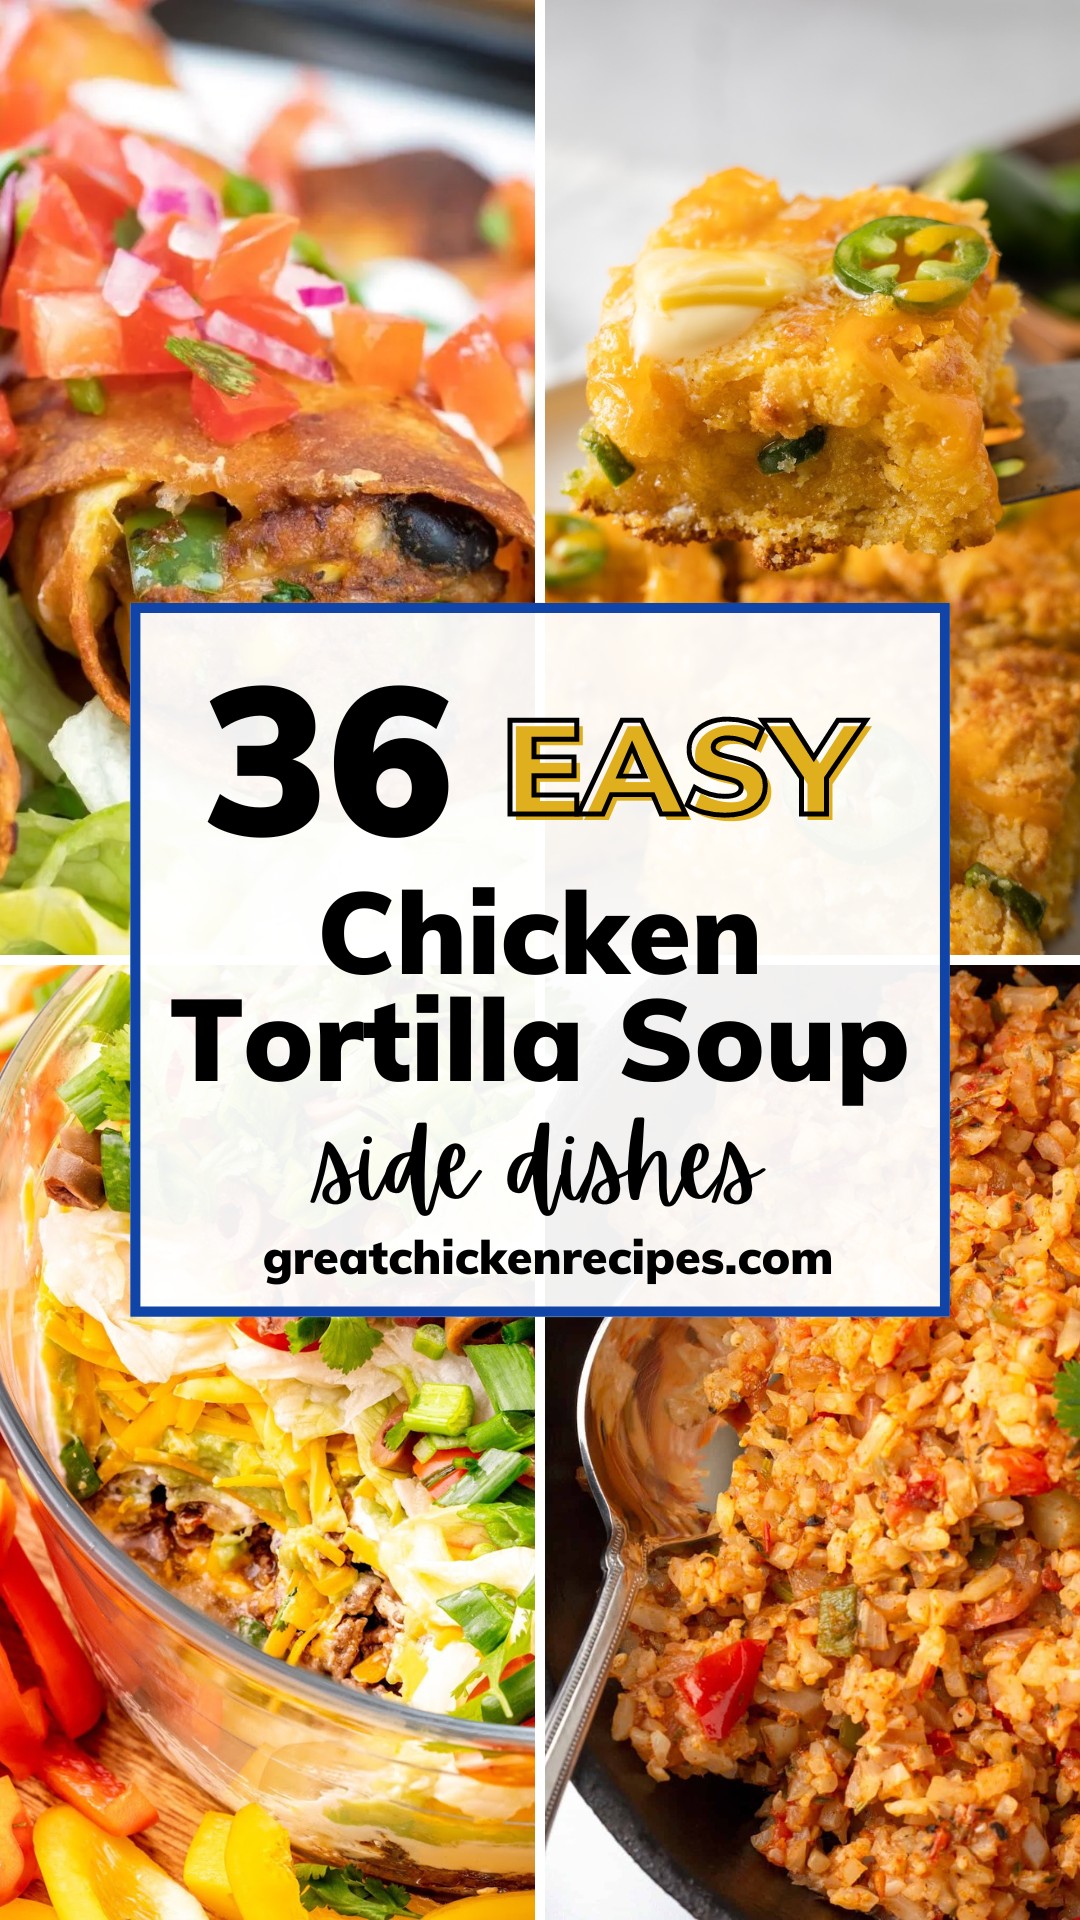 What To Serve With Chicken Tortilla Soup - Great Chicken Recipes